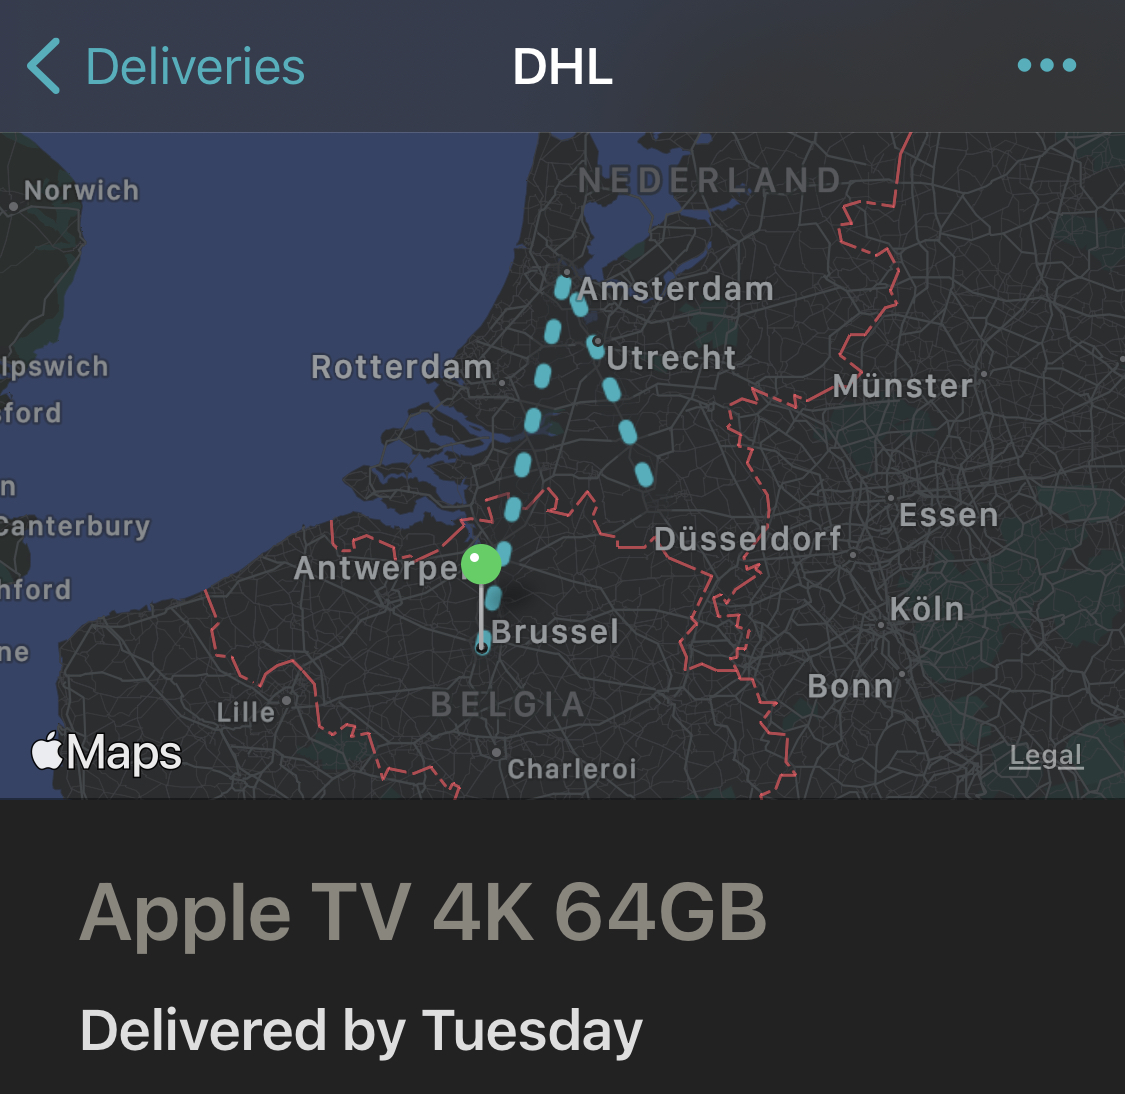 Apple TV 4k 2021 delivered by Tuesday